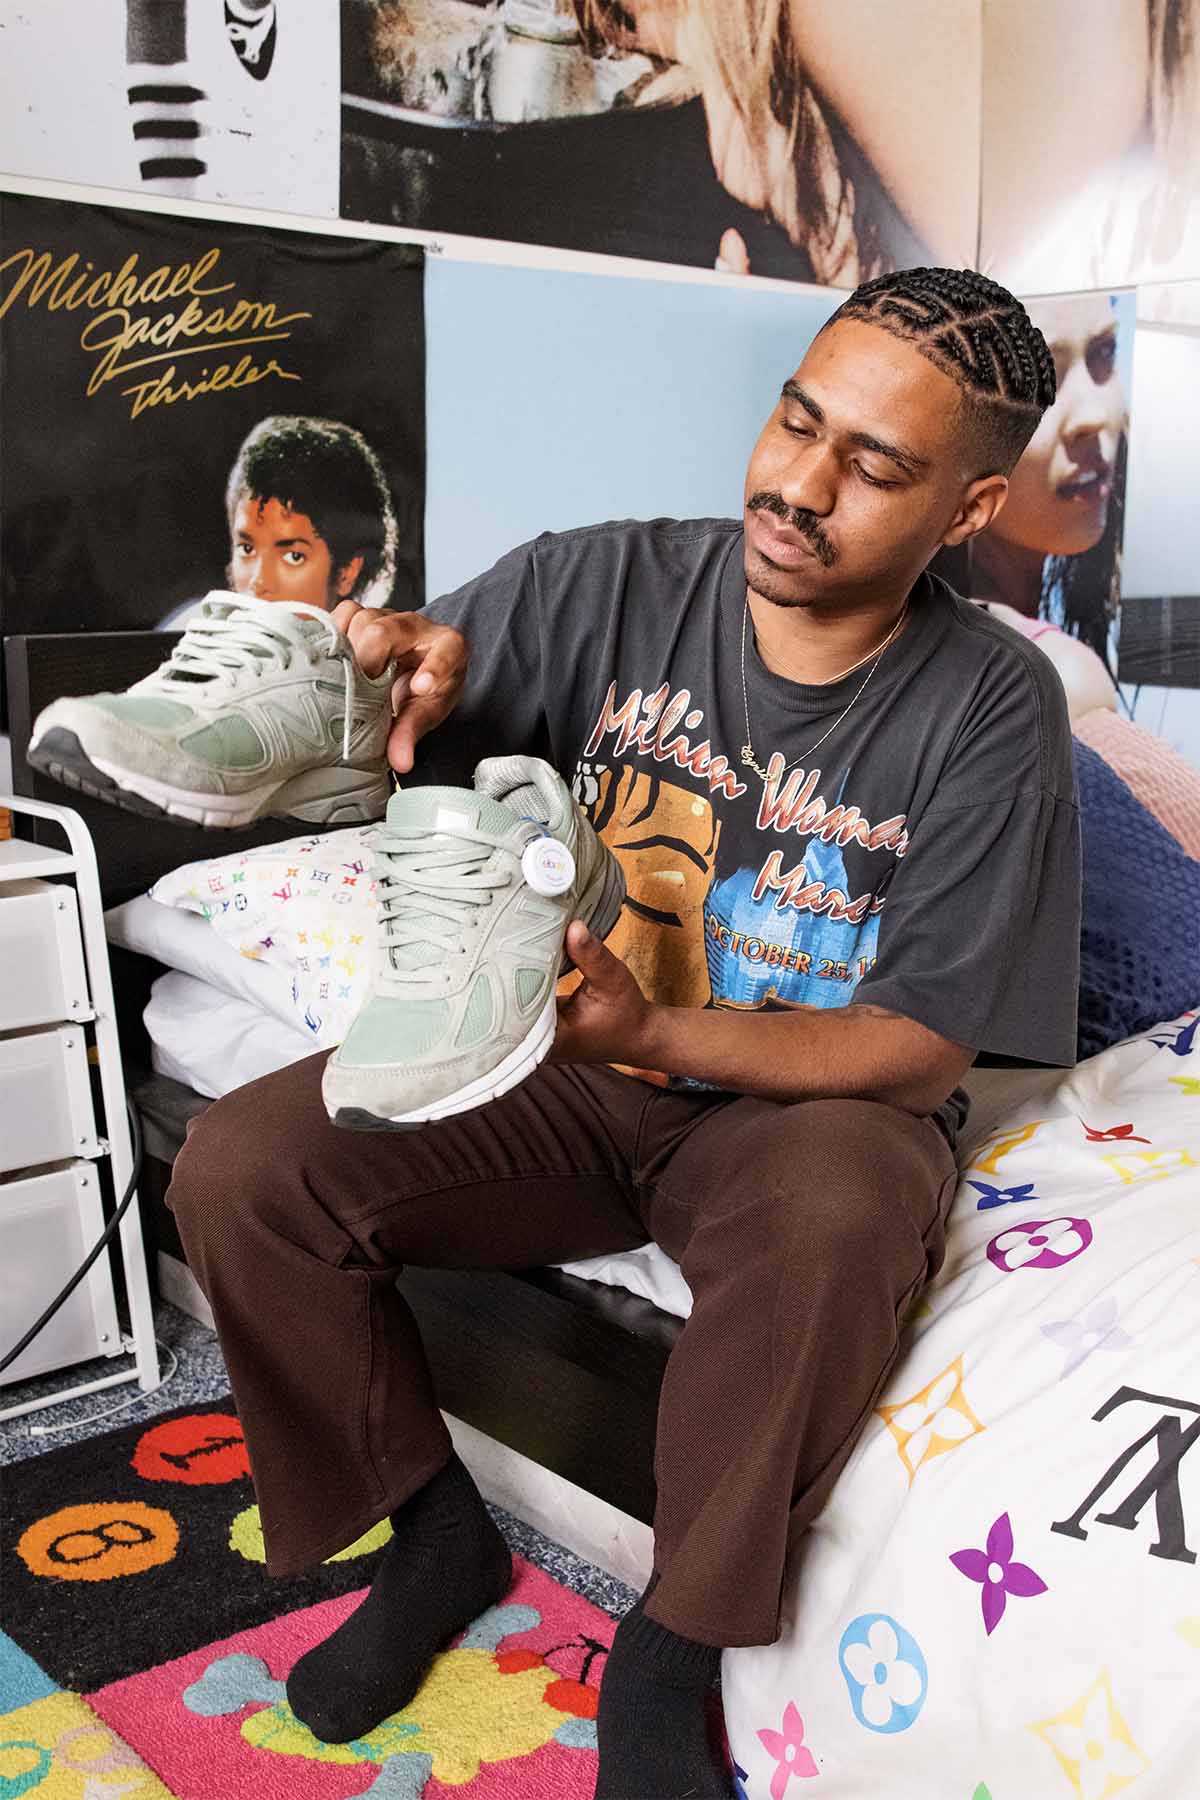 Cyril Palmer Shares His Best eBay Sneaker Shopping Tips